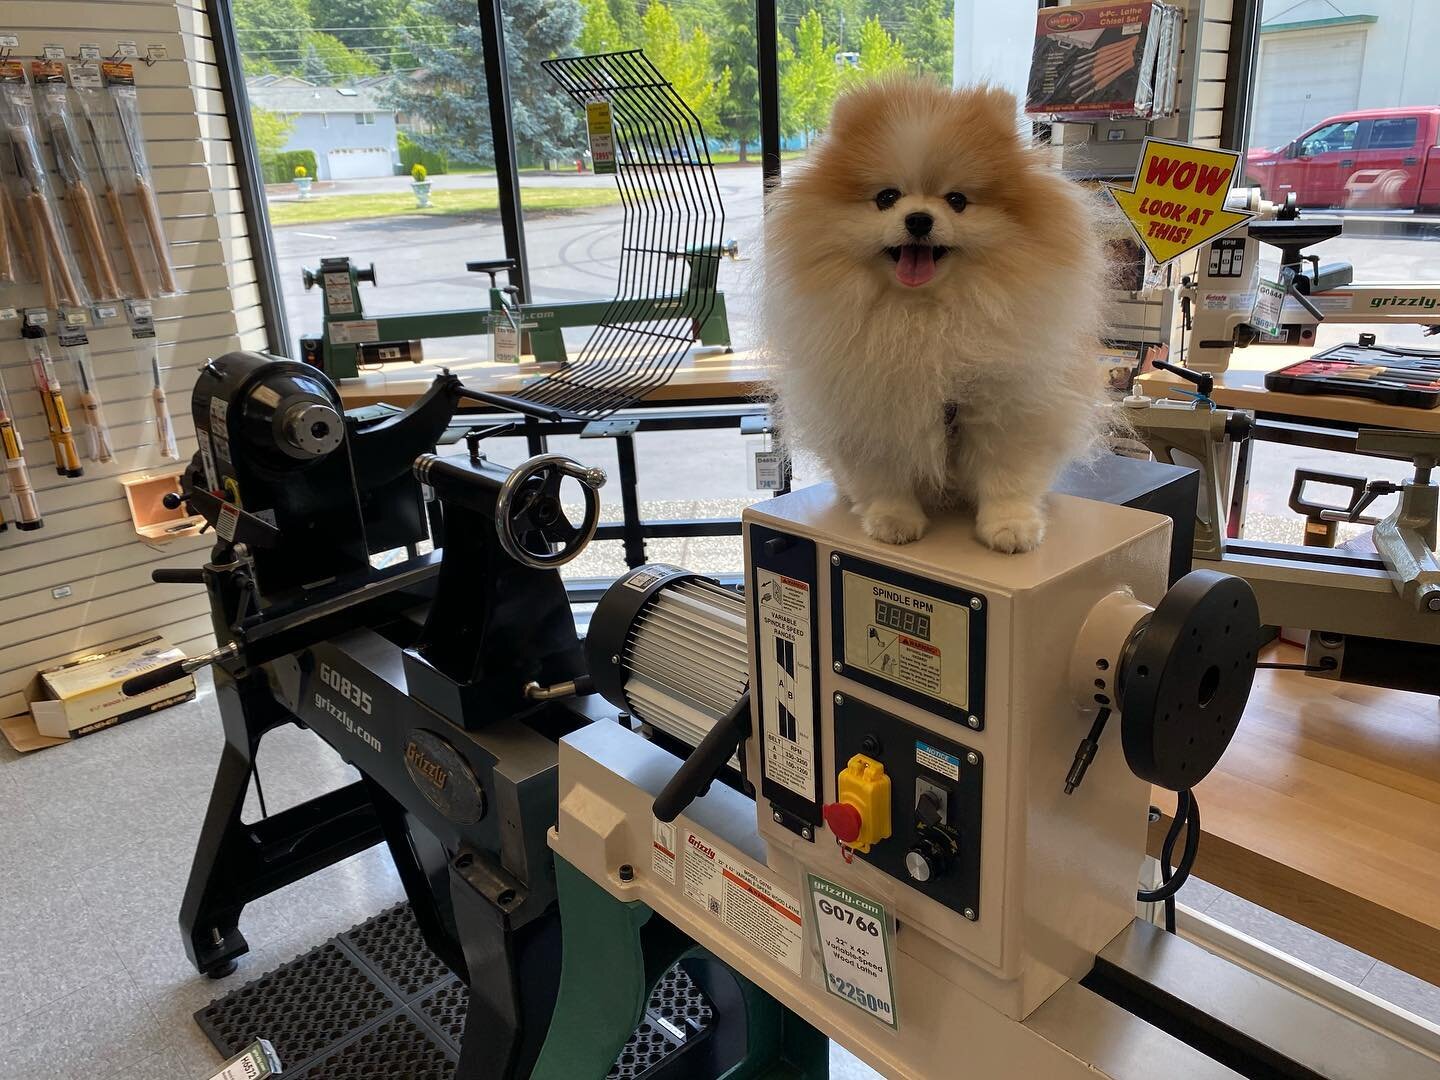 #fluffybuttfriday Back when @paddington.the.pom helped me pick out my new lathe. I think he just liked this one because he could easily sit on the headstock.
.
.
.
#woodworker #wood #maker #woodcraft #woodturninglathe #woodworking #woodworkers #recla